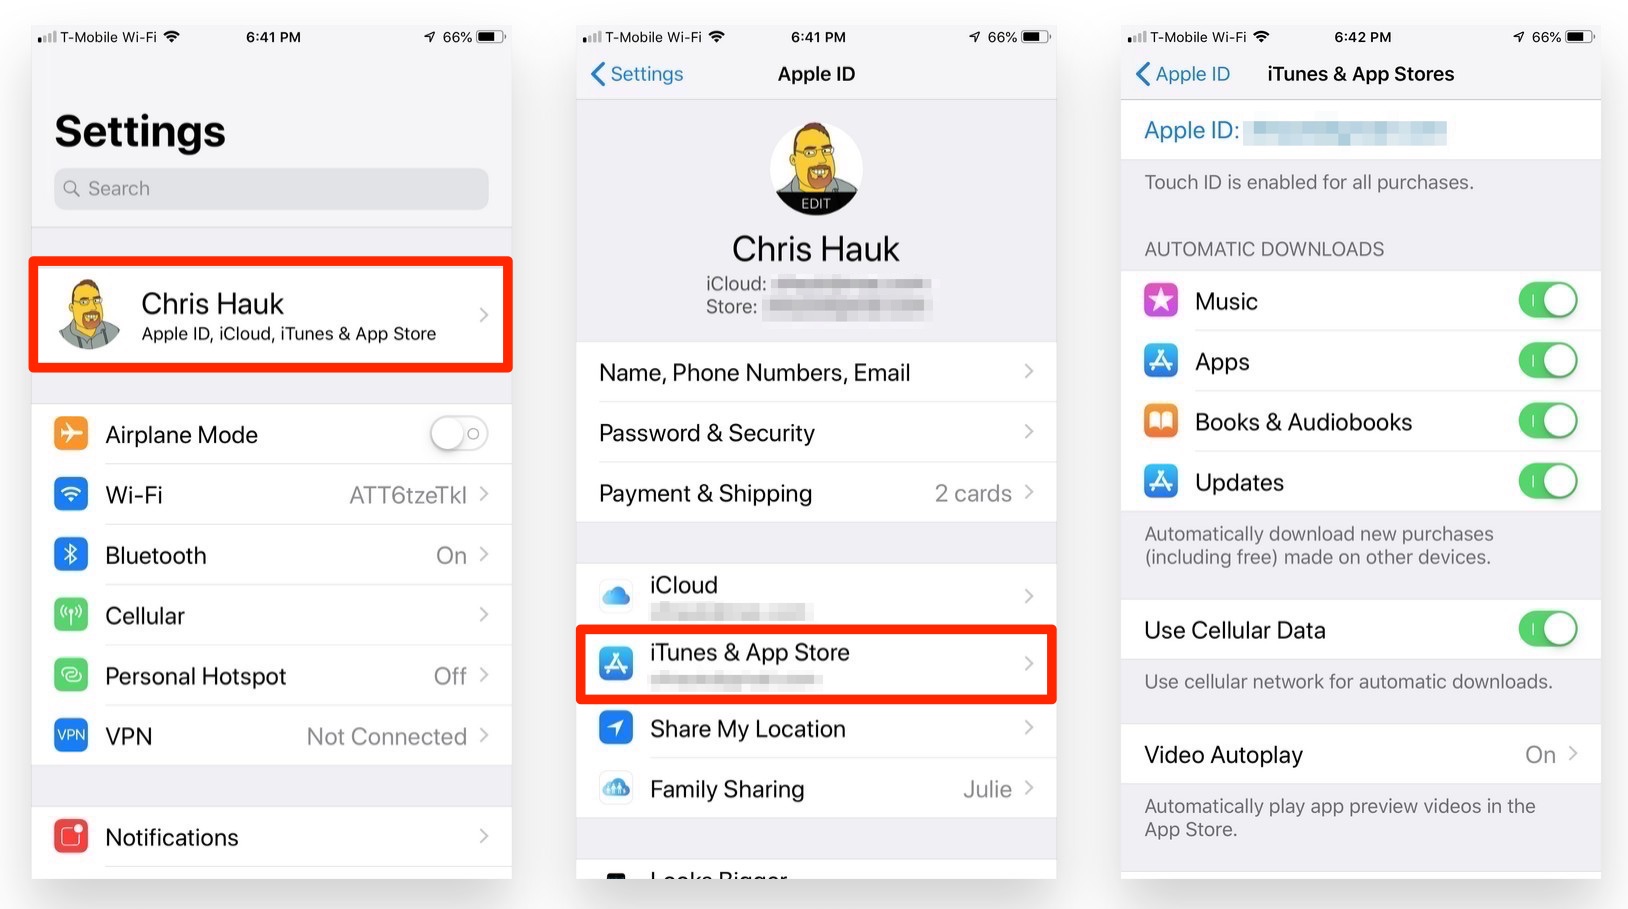 How To Toggle 'Automatic Downloads' On or Off on Your iOS Device